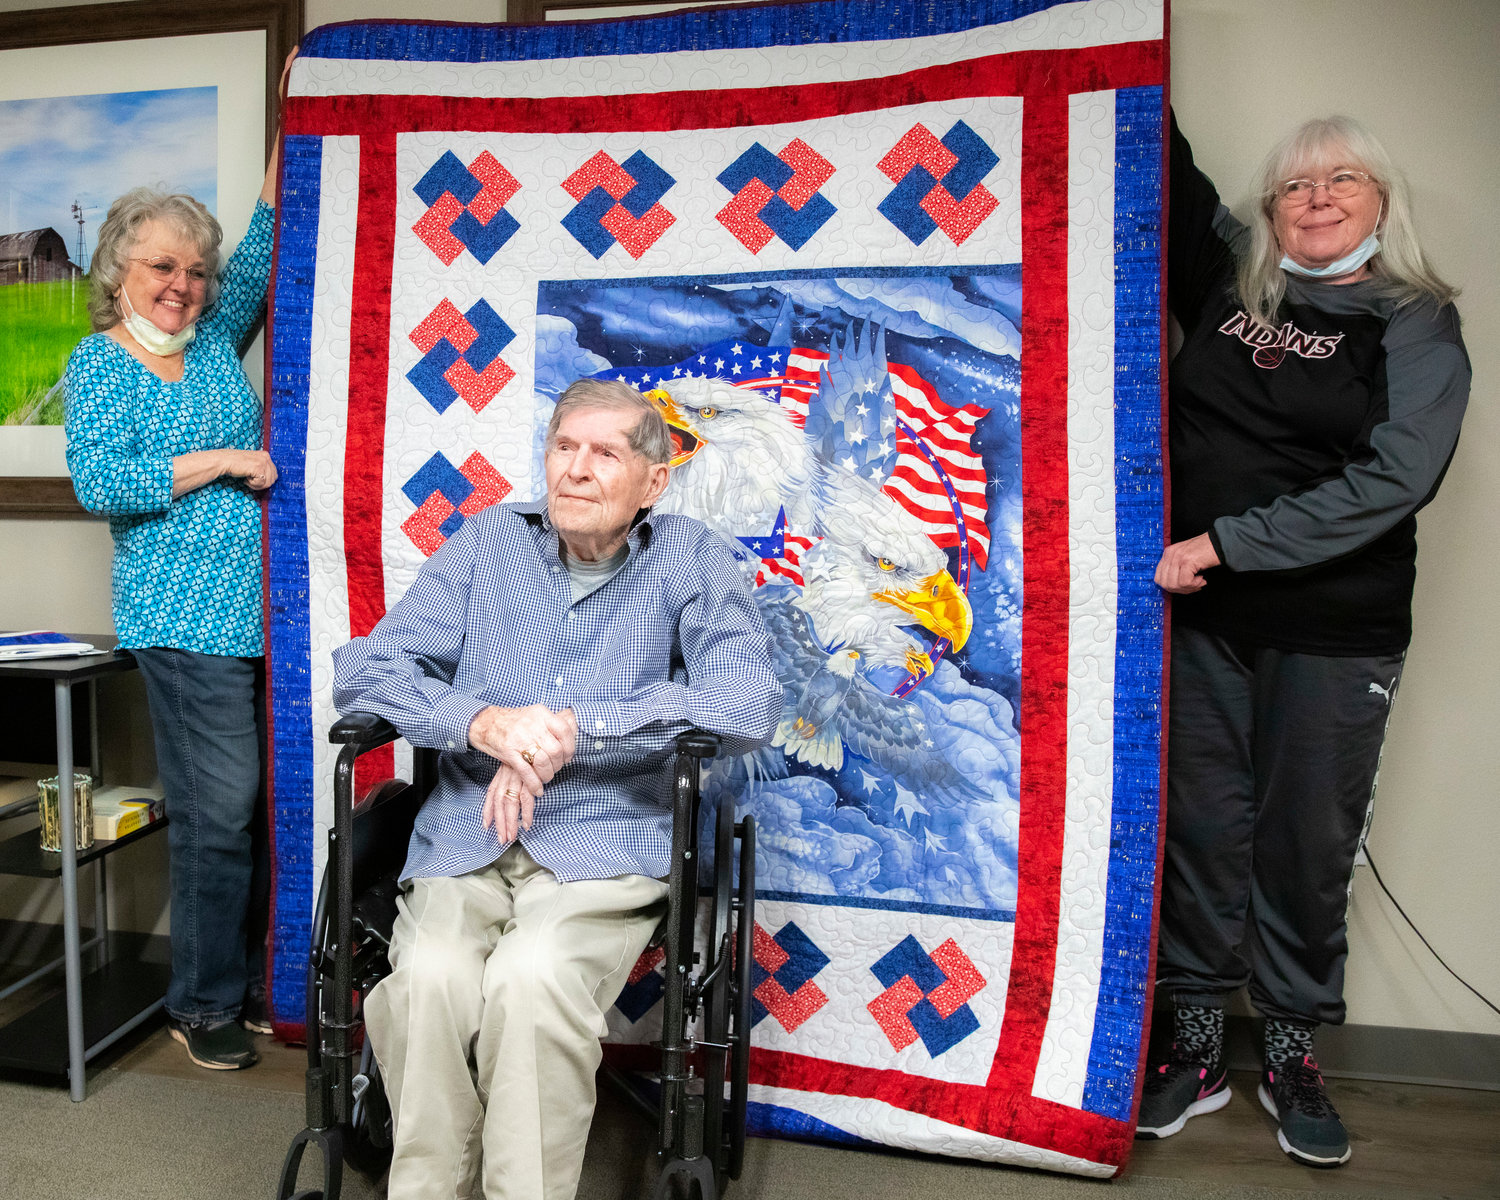 Debbie Austons and Connie Carter smile and hold up a blanket for James F. Van Ackeren, a WWII veteran who served as a staff sergeant in the U.S. Army, during a Quilts of Valor ceremony at Woodland Estates in Chehalis on Thursday.